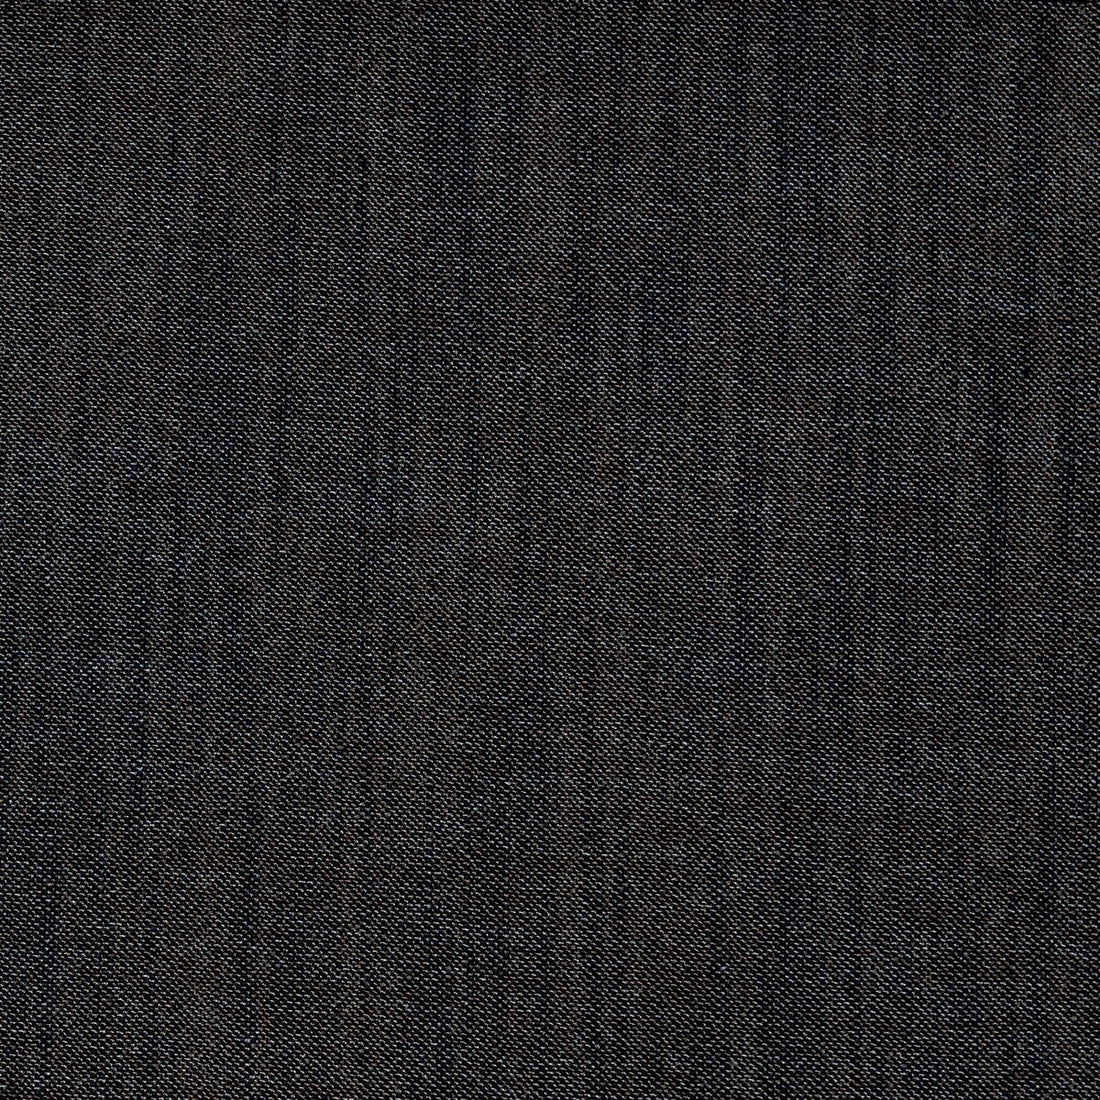 Uganda fabric in blk/tostado color - pattern GDT5389.8.0 - by Gaston y Daniela in the Gaston Africalia collection